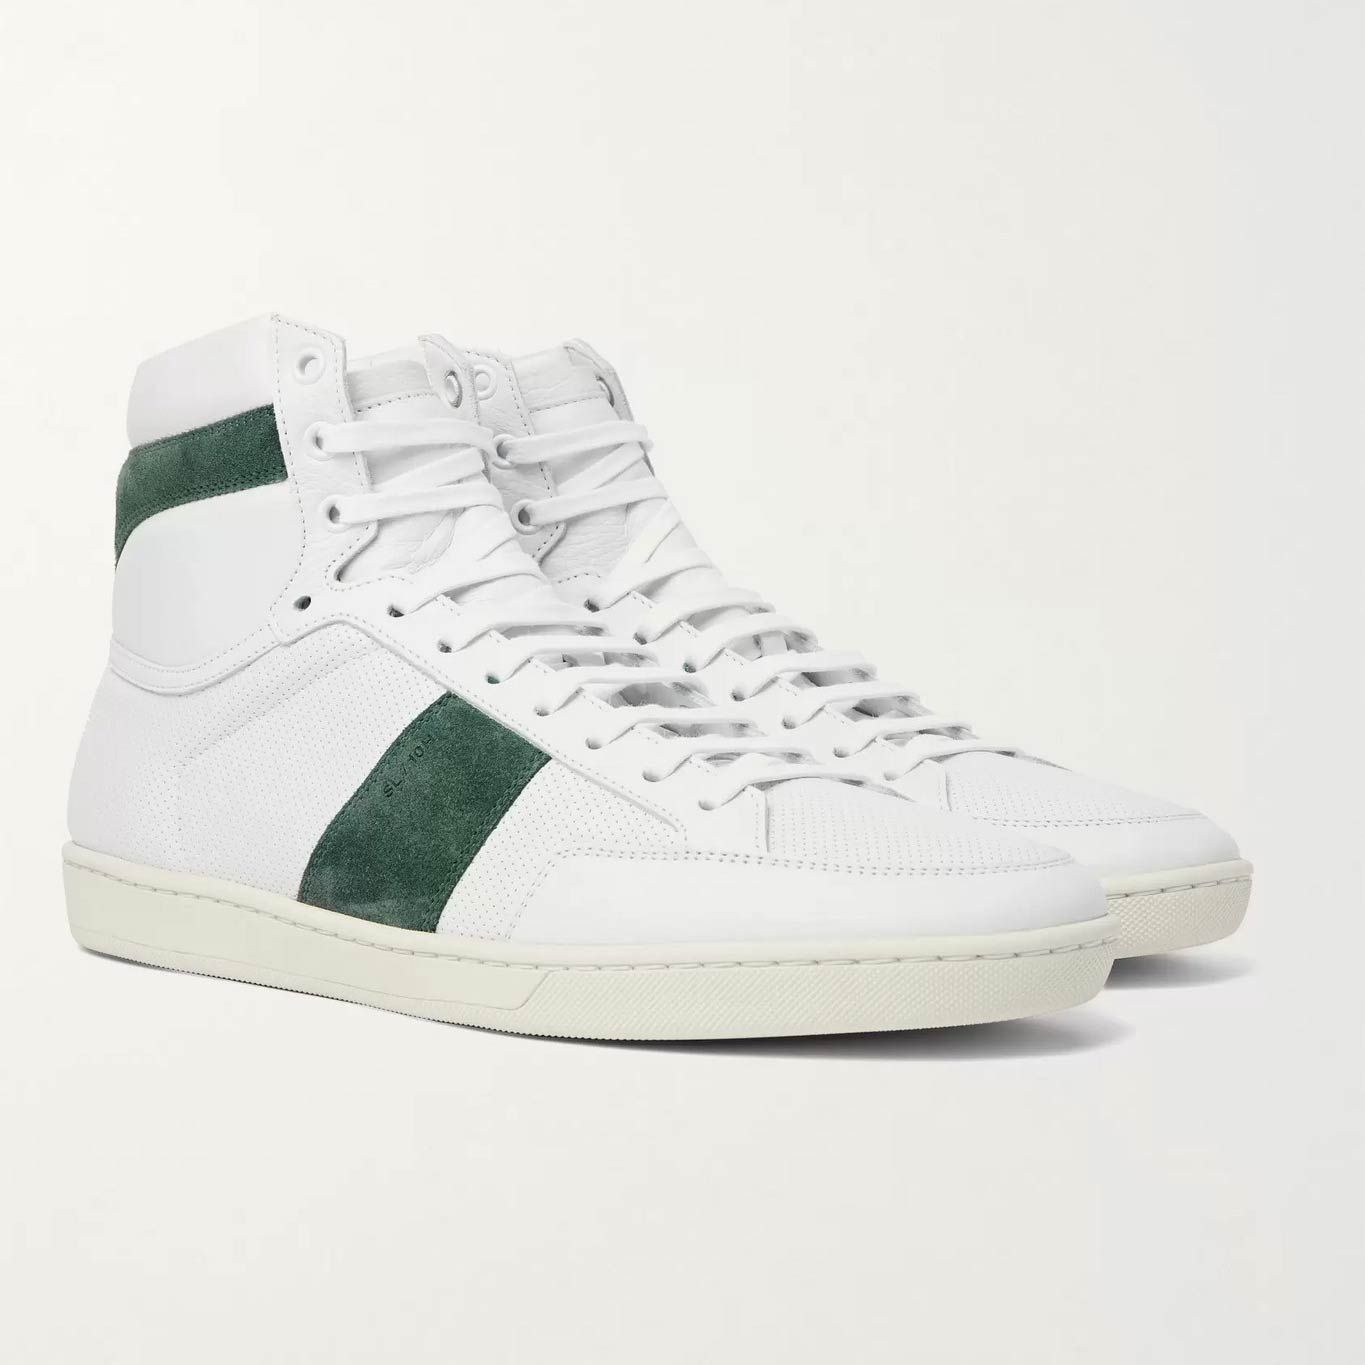 SL/10 Suede-Trimmed Perforated Leather High-Top Sneakers